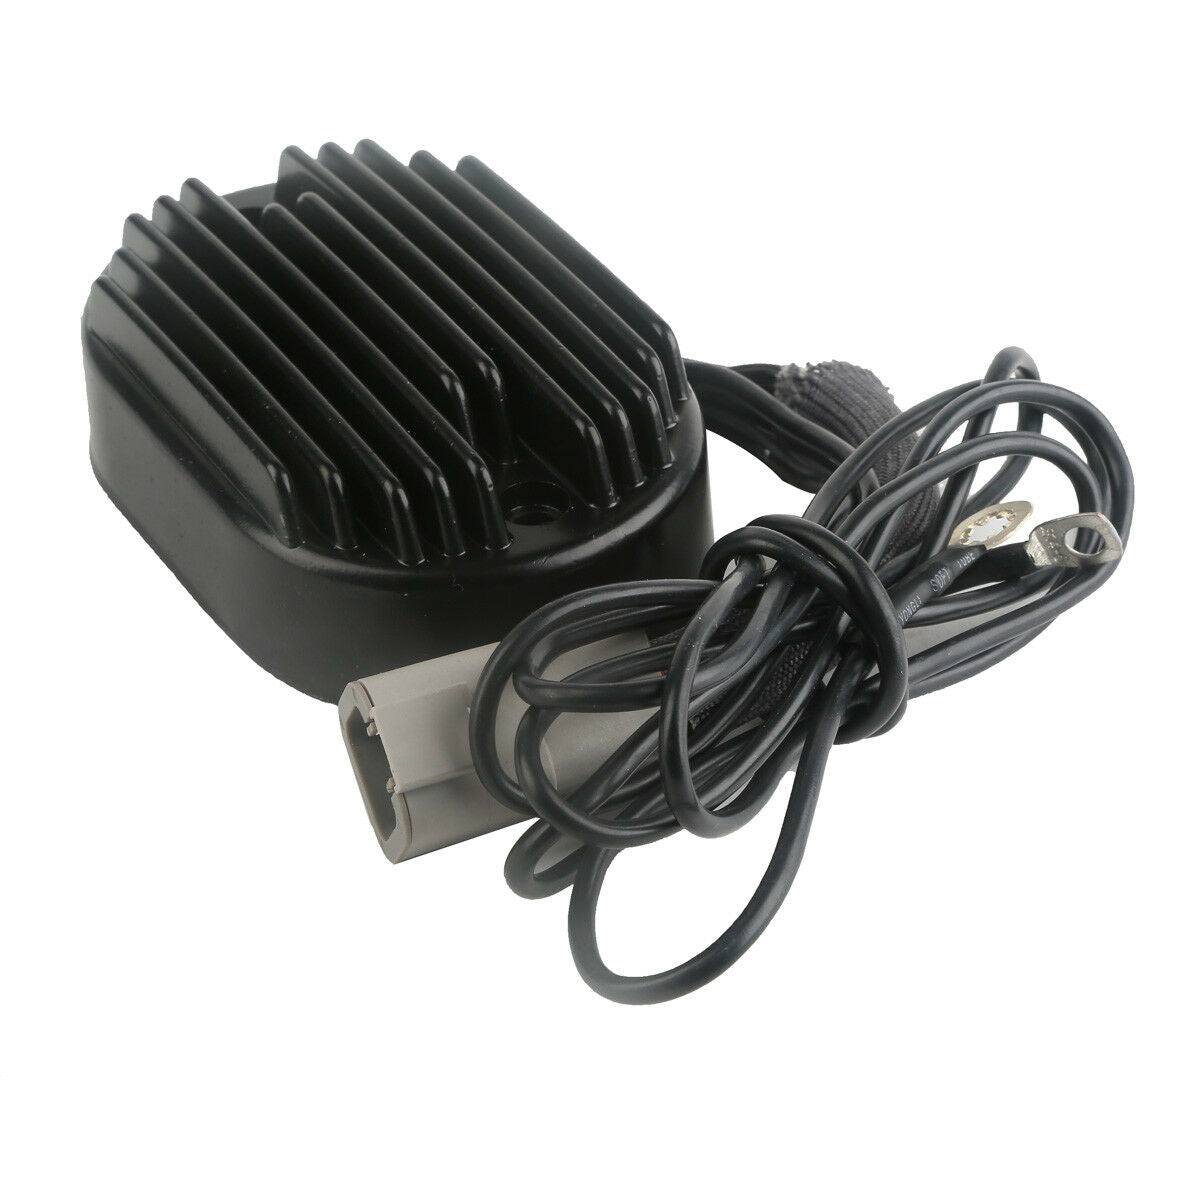 Voltage Regulator Rectifier Fit For Harley Fatboy 2001-2006 05 Heritage Softail - Moto Life Products